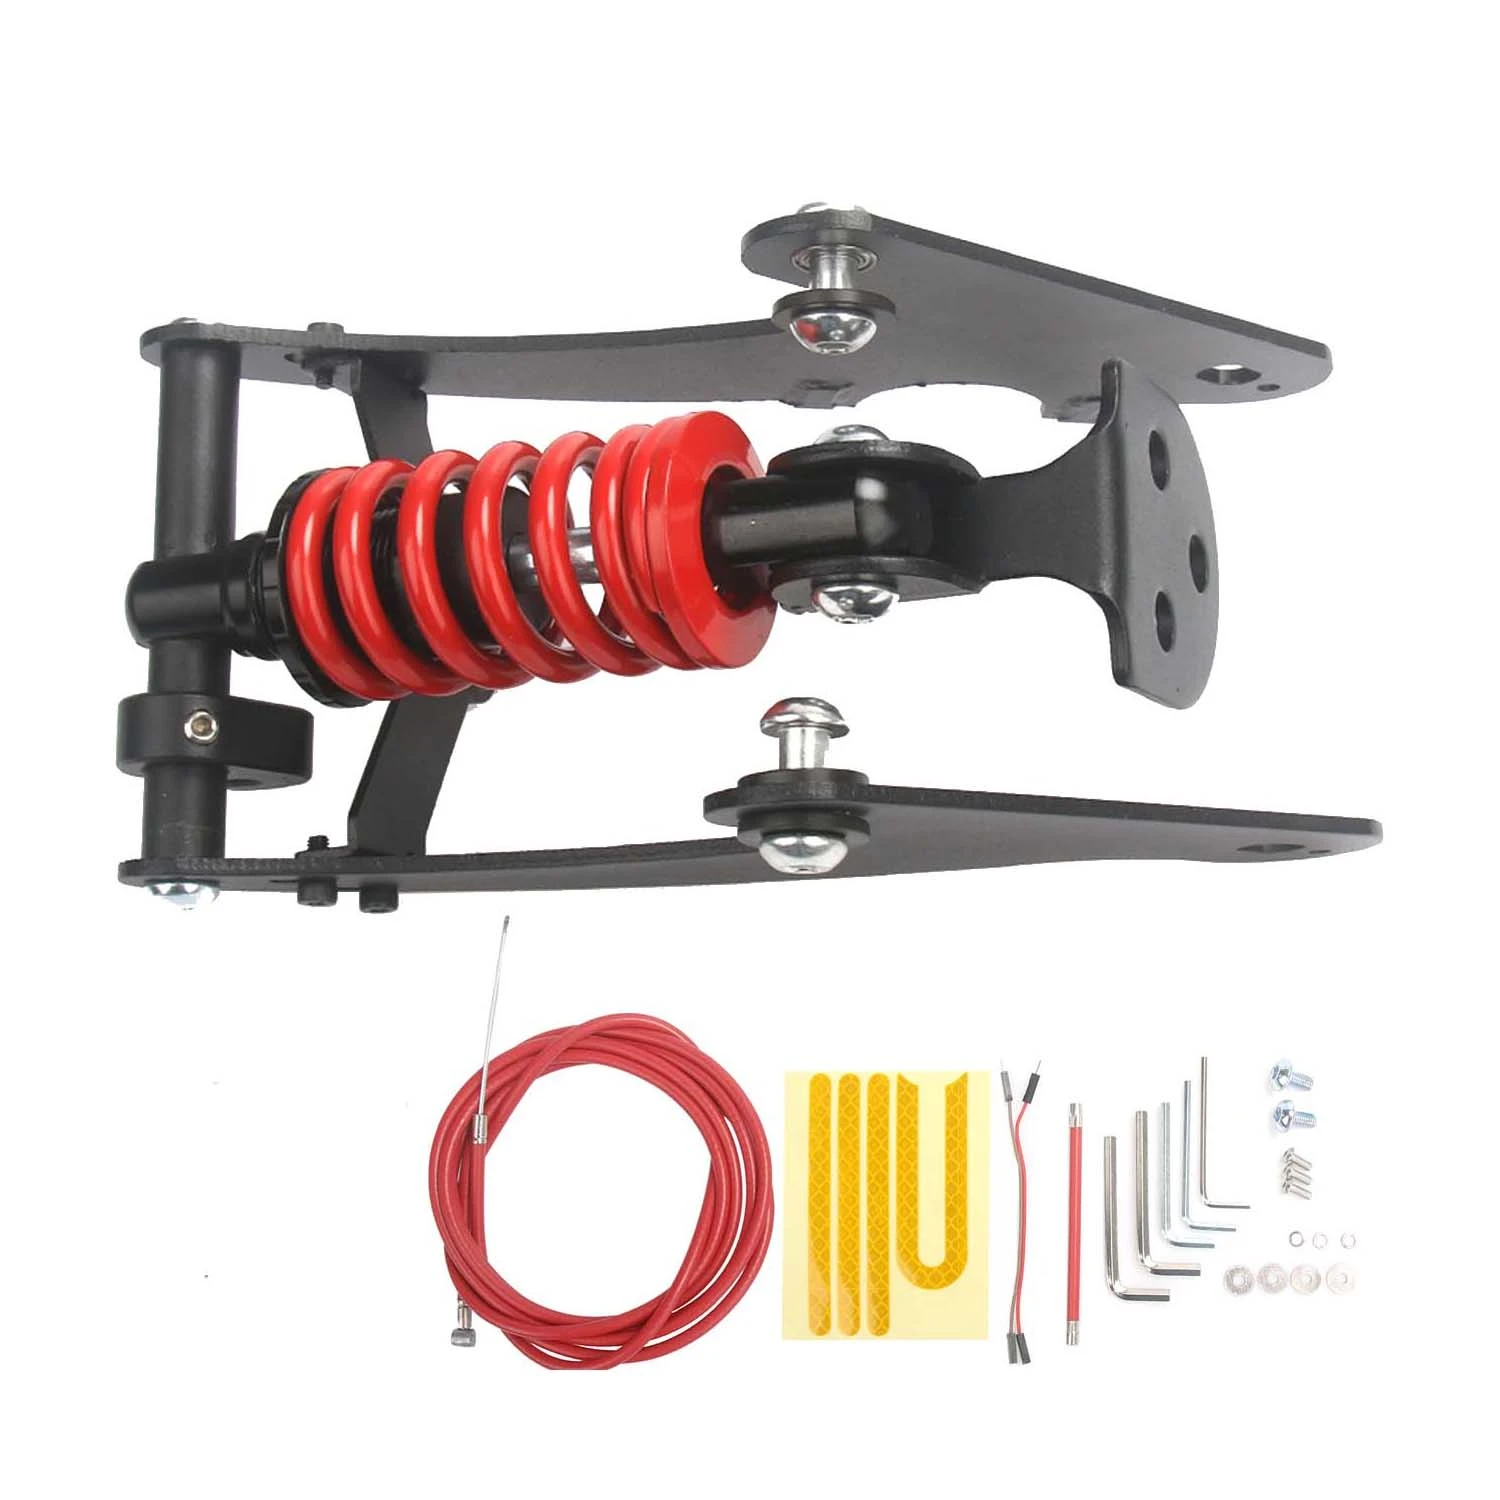 Scooter Rear Suspension for Xiaomi M365 Pro Pro2 Electric Scooter Rear Shock Absorber Shock Absorption Fork Scooters accessories